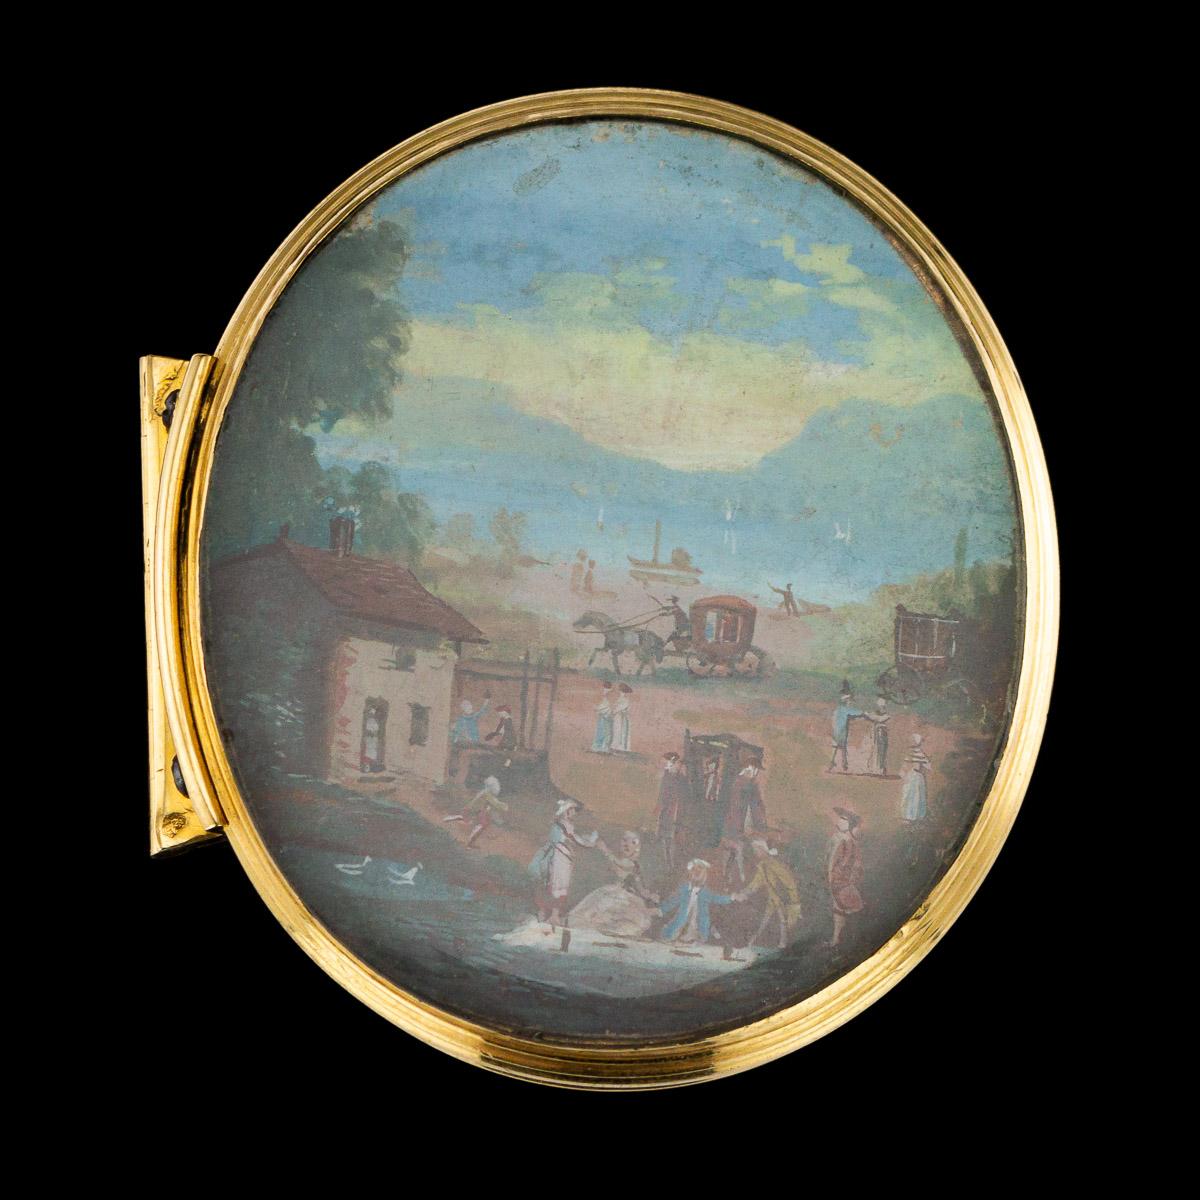 Antique 18th century rare Dutch gold snuff box, of plain oval form with hinged cover, the cover set with a miniature under glass, depicting a Dutch village scene. Hallmarked with Dutch Gold marks, Amsterdam, year 1739 (E), Makers mark Crowned IH,